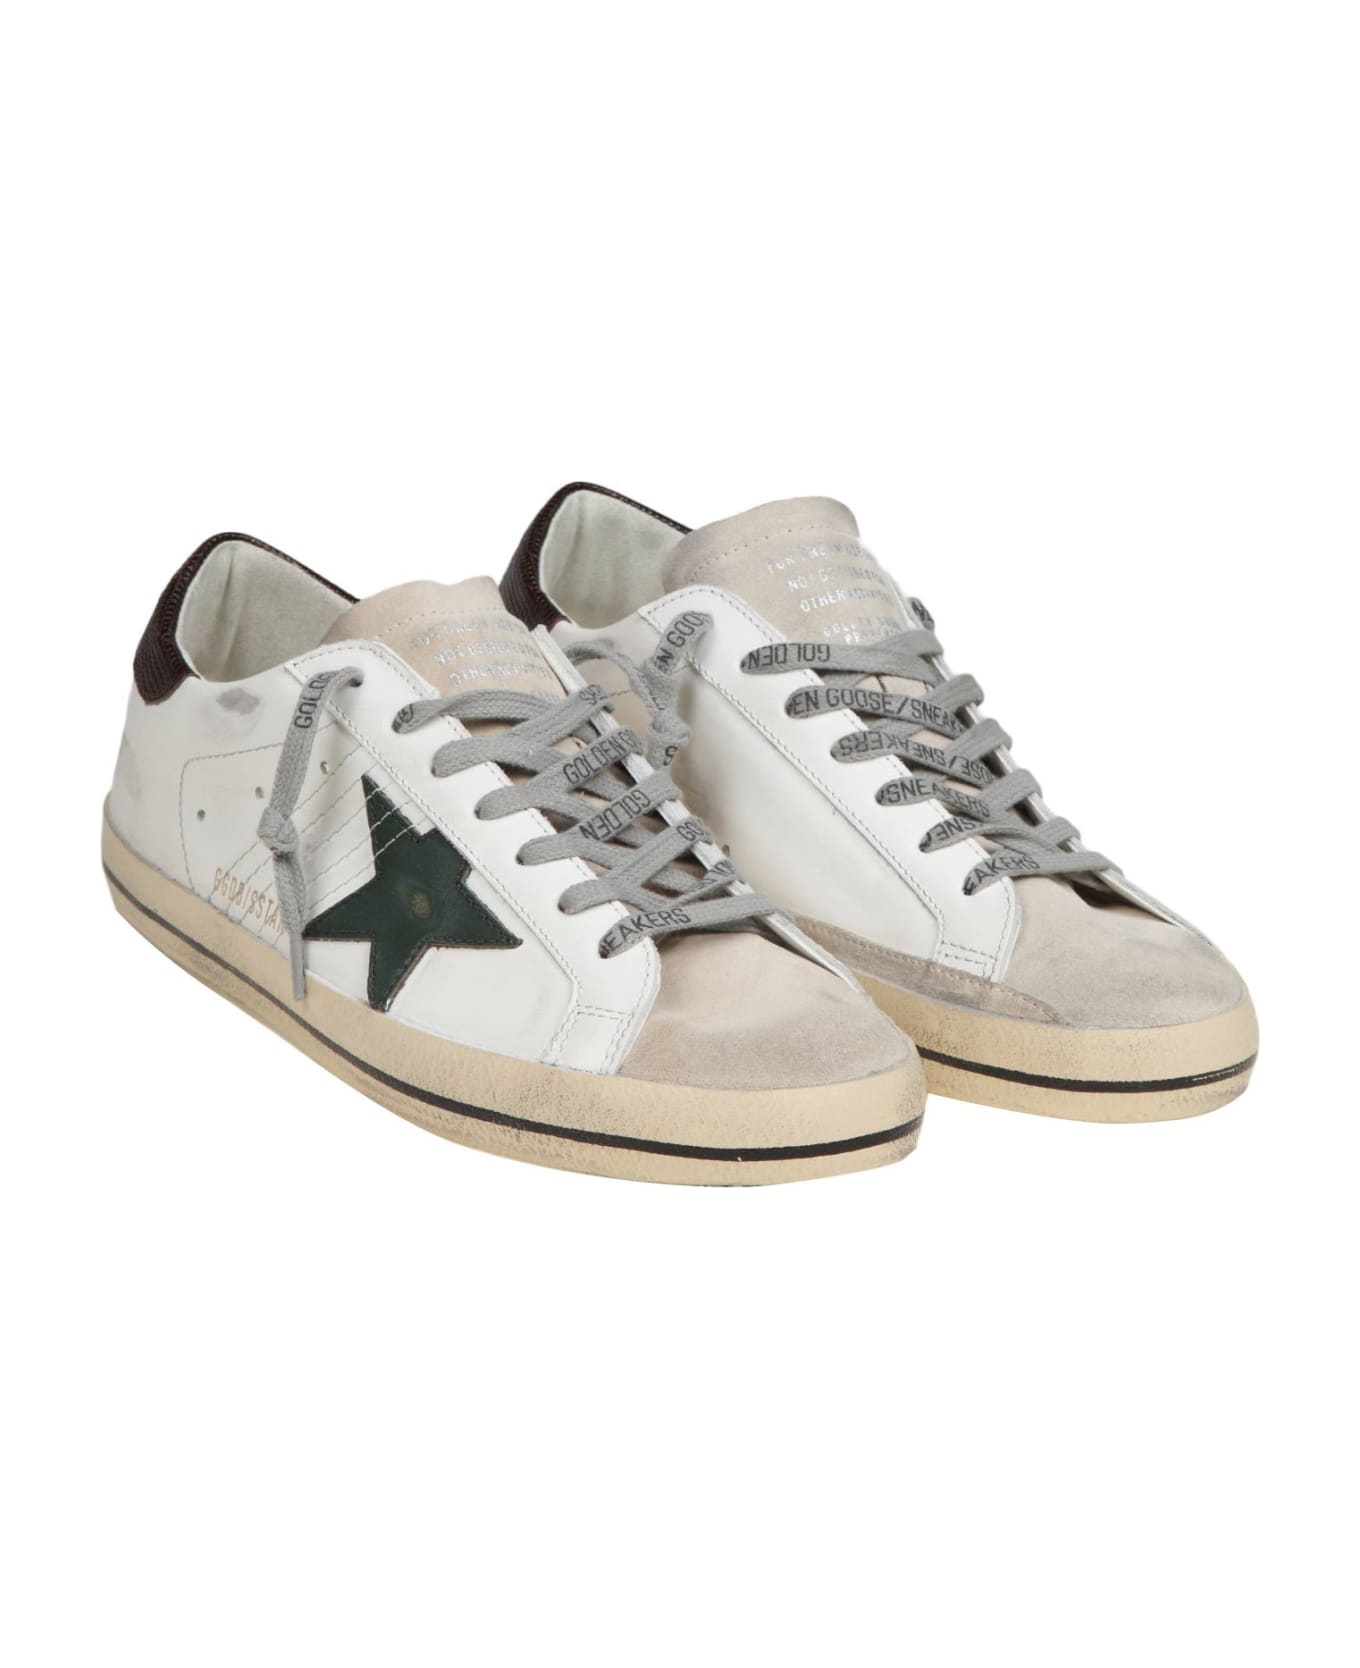 Golden Goose Super Star In White And Green Leather And Suede - WHT/GREEN BROWN